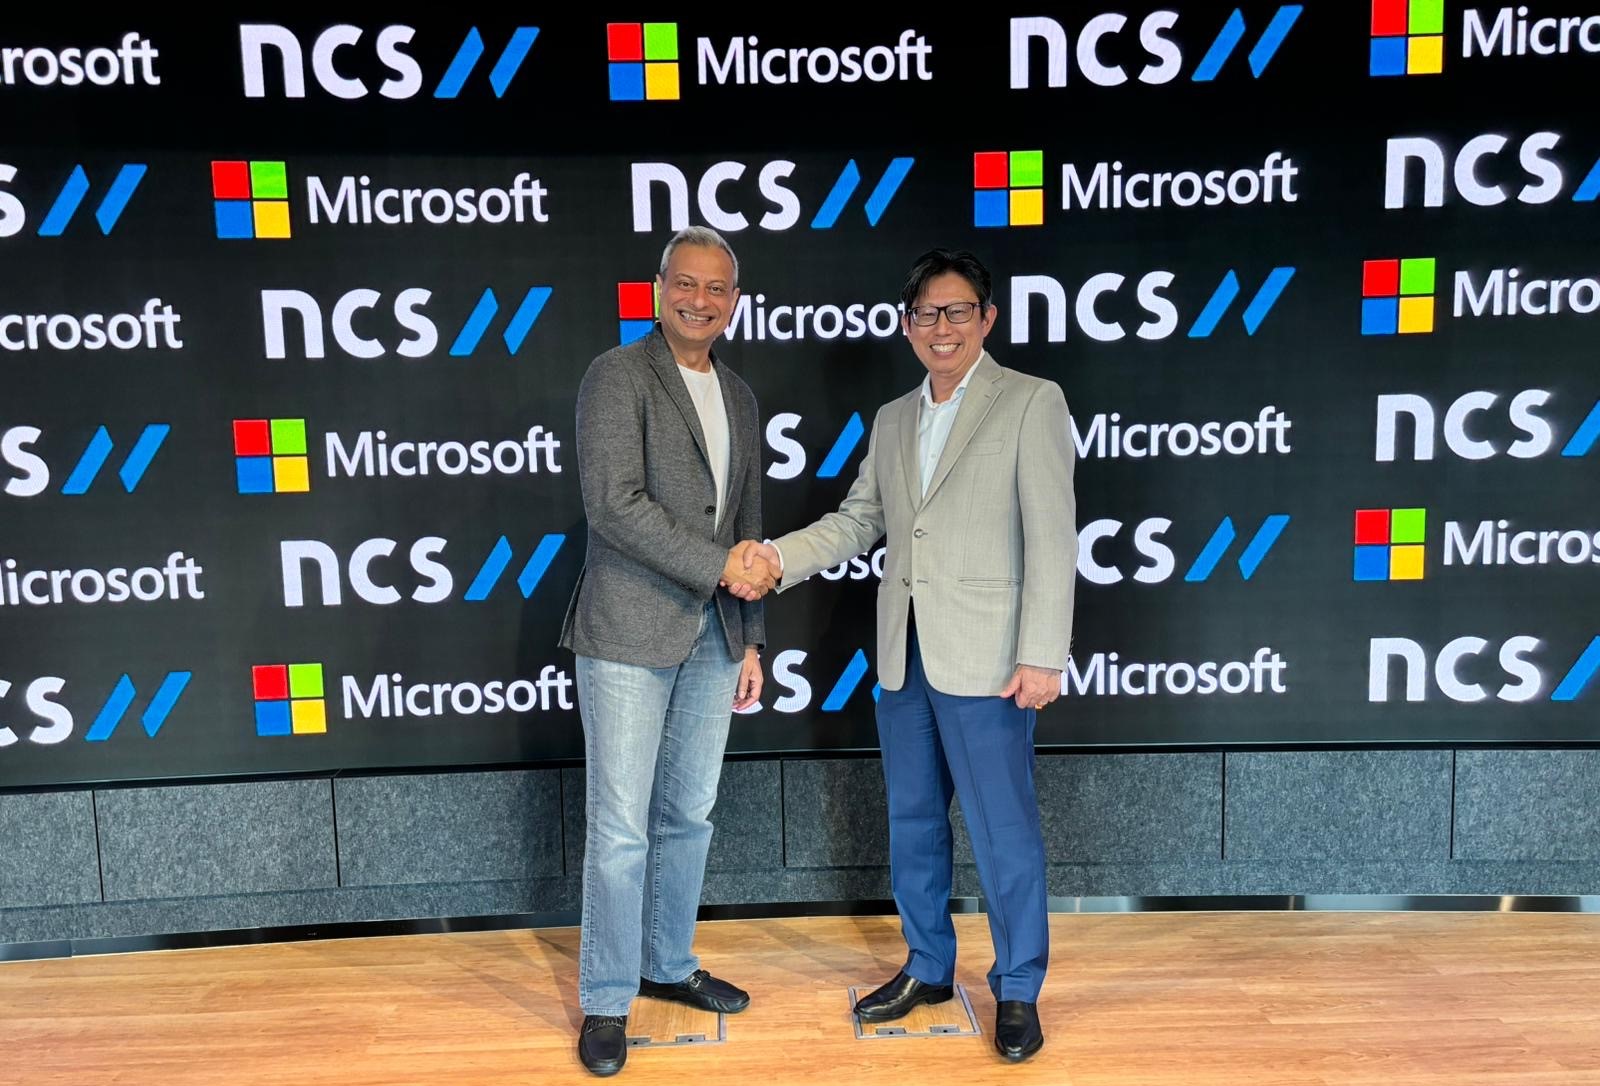 Ng Kuo Pin, Chief Executive Officer, NCS (right) and Ahmed Mazhari, President, Microsoft Asia launching the expanded collaboration to accelerate innovation, create new Intellectual Property and solutions for client